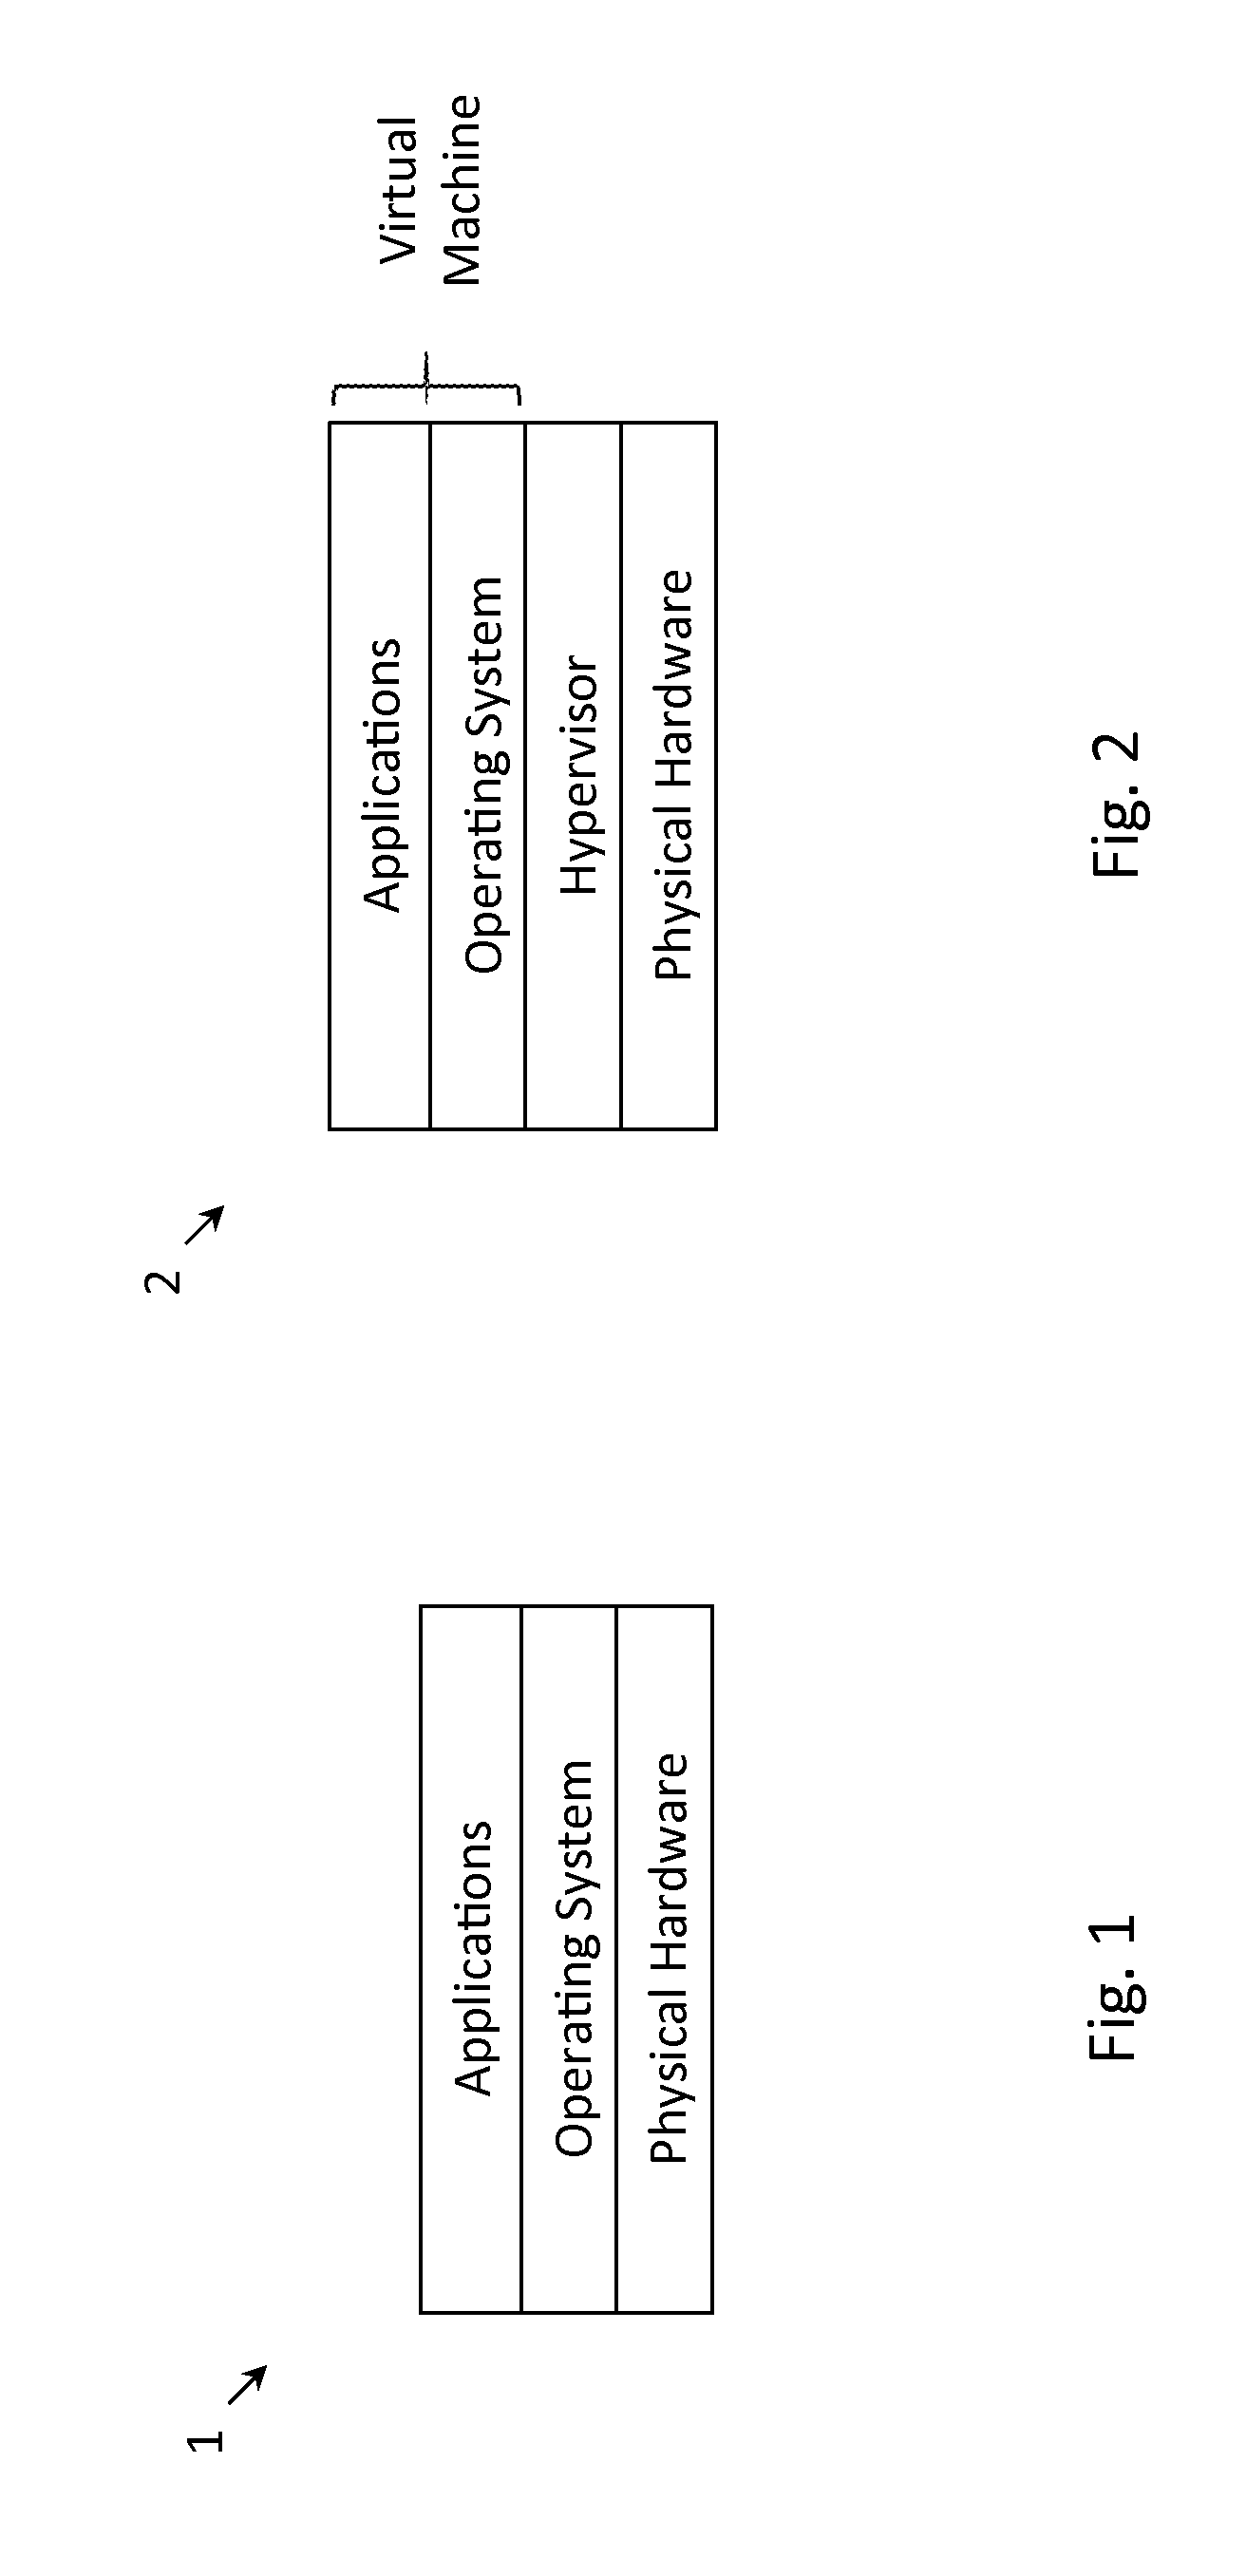 Methods and systems for concurrently taking snapshots of a plurality of virtual machines